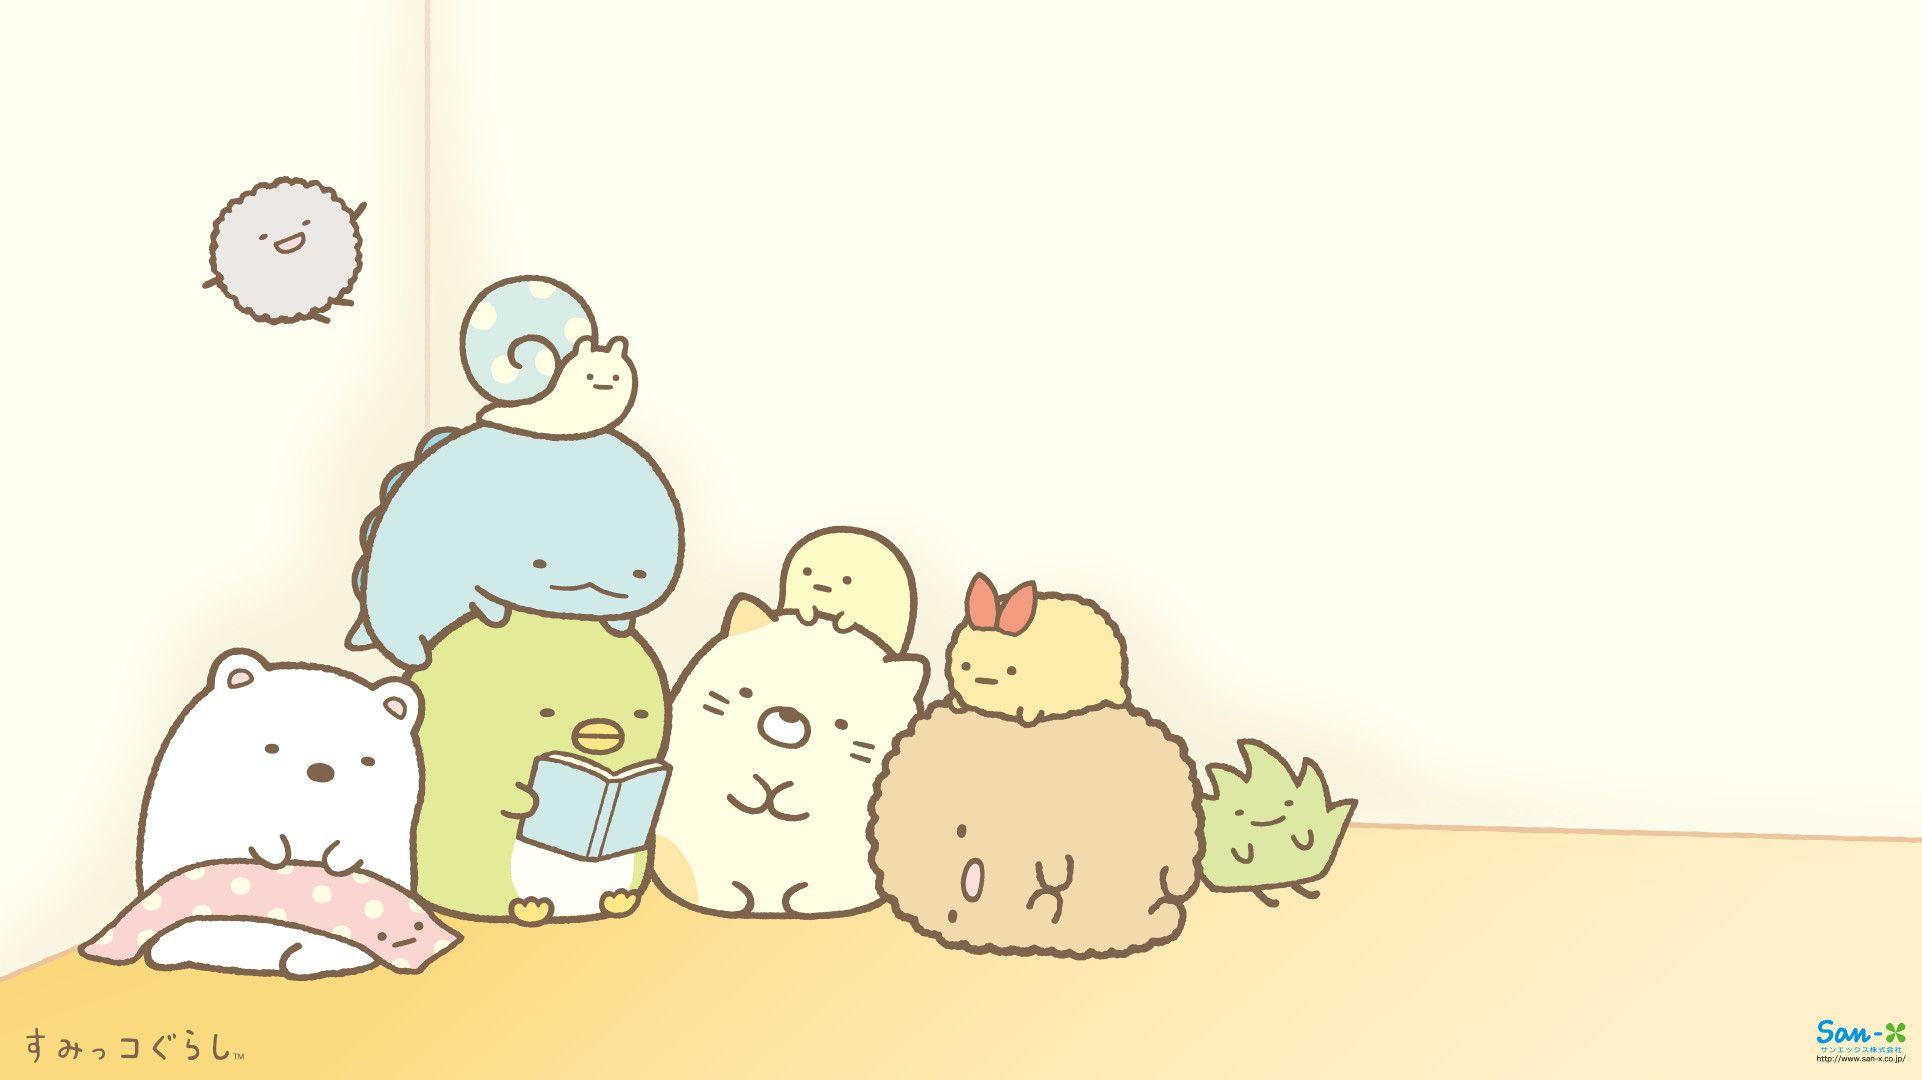 molang background